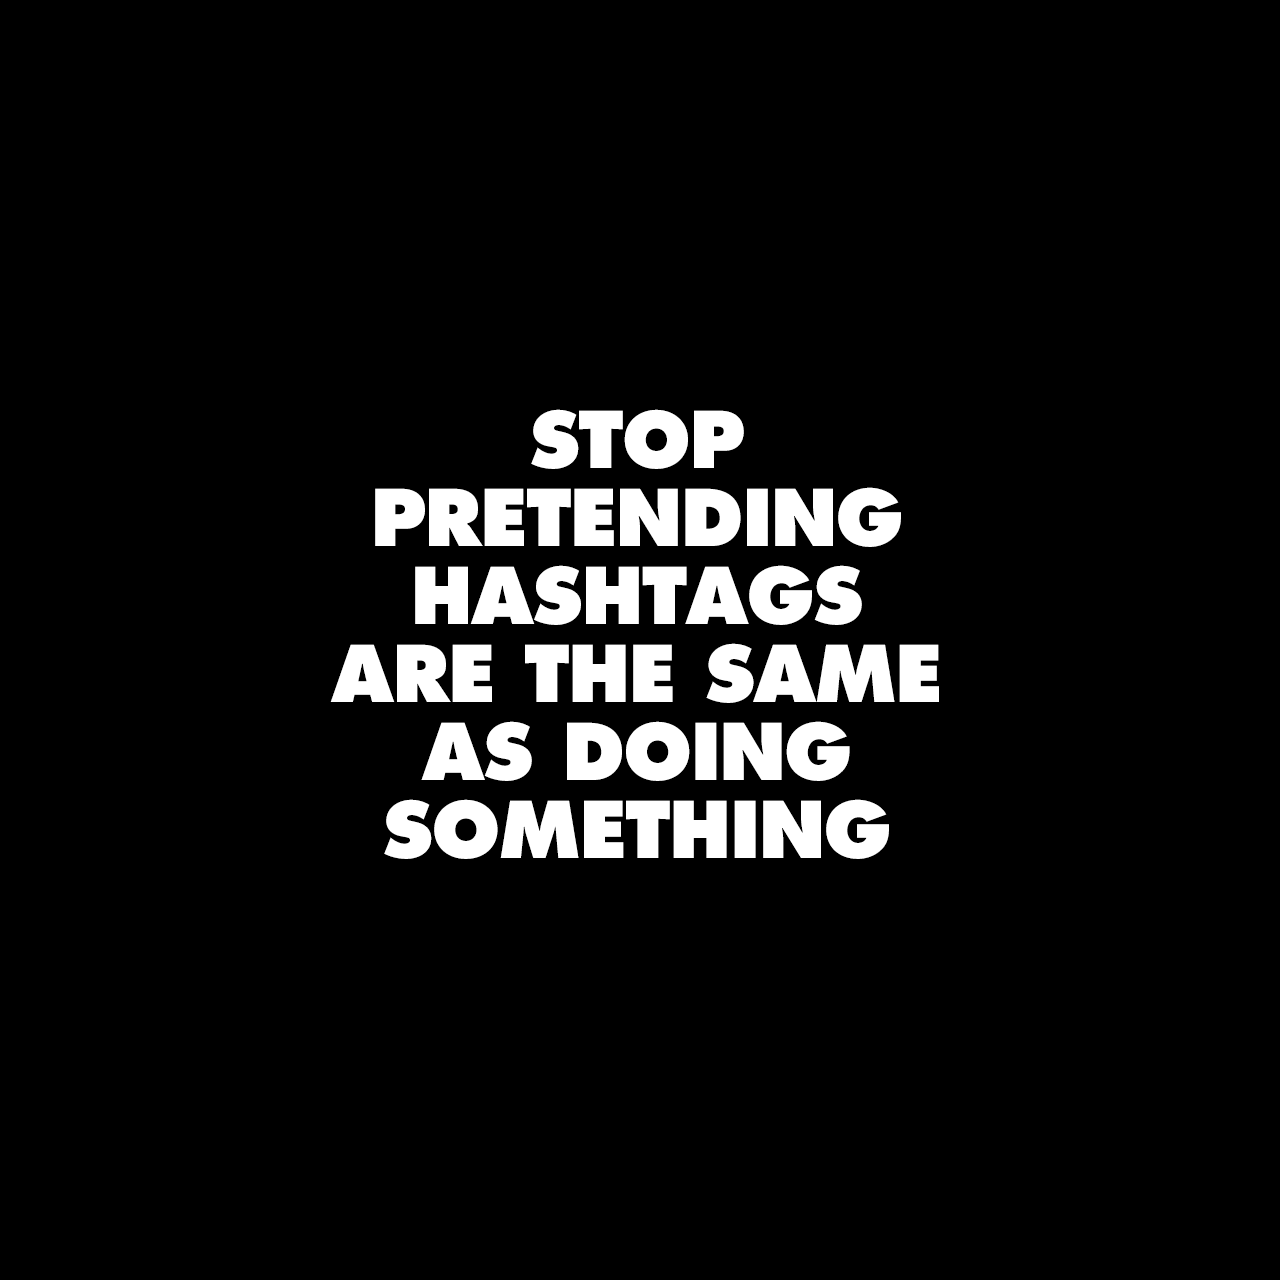 Stop pretending hashtags are the same as doing something